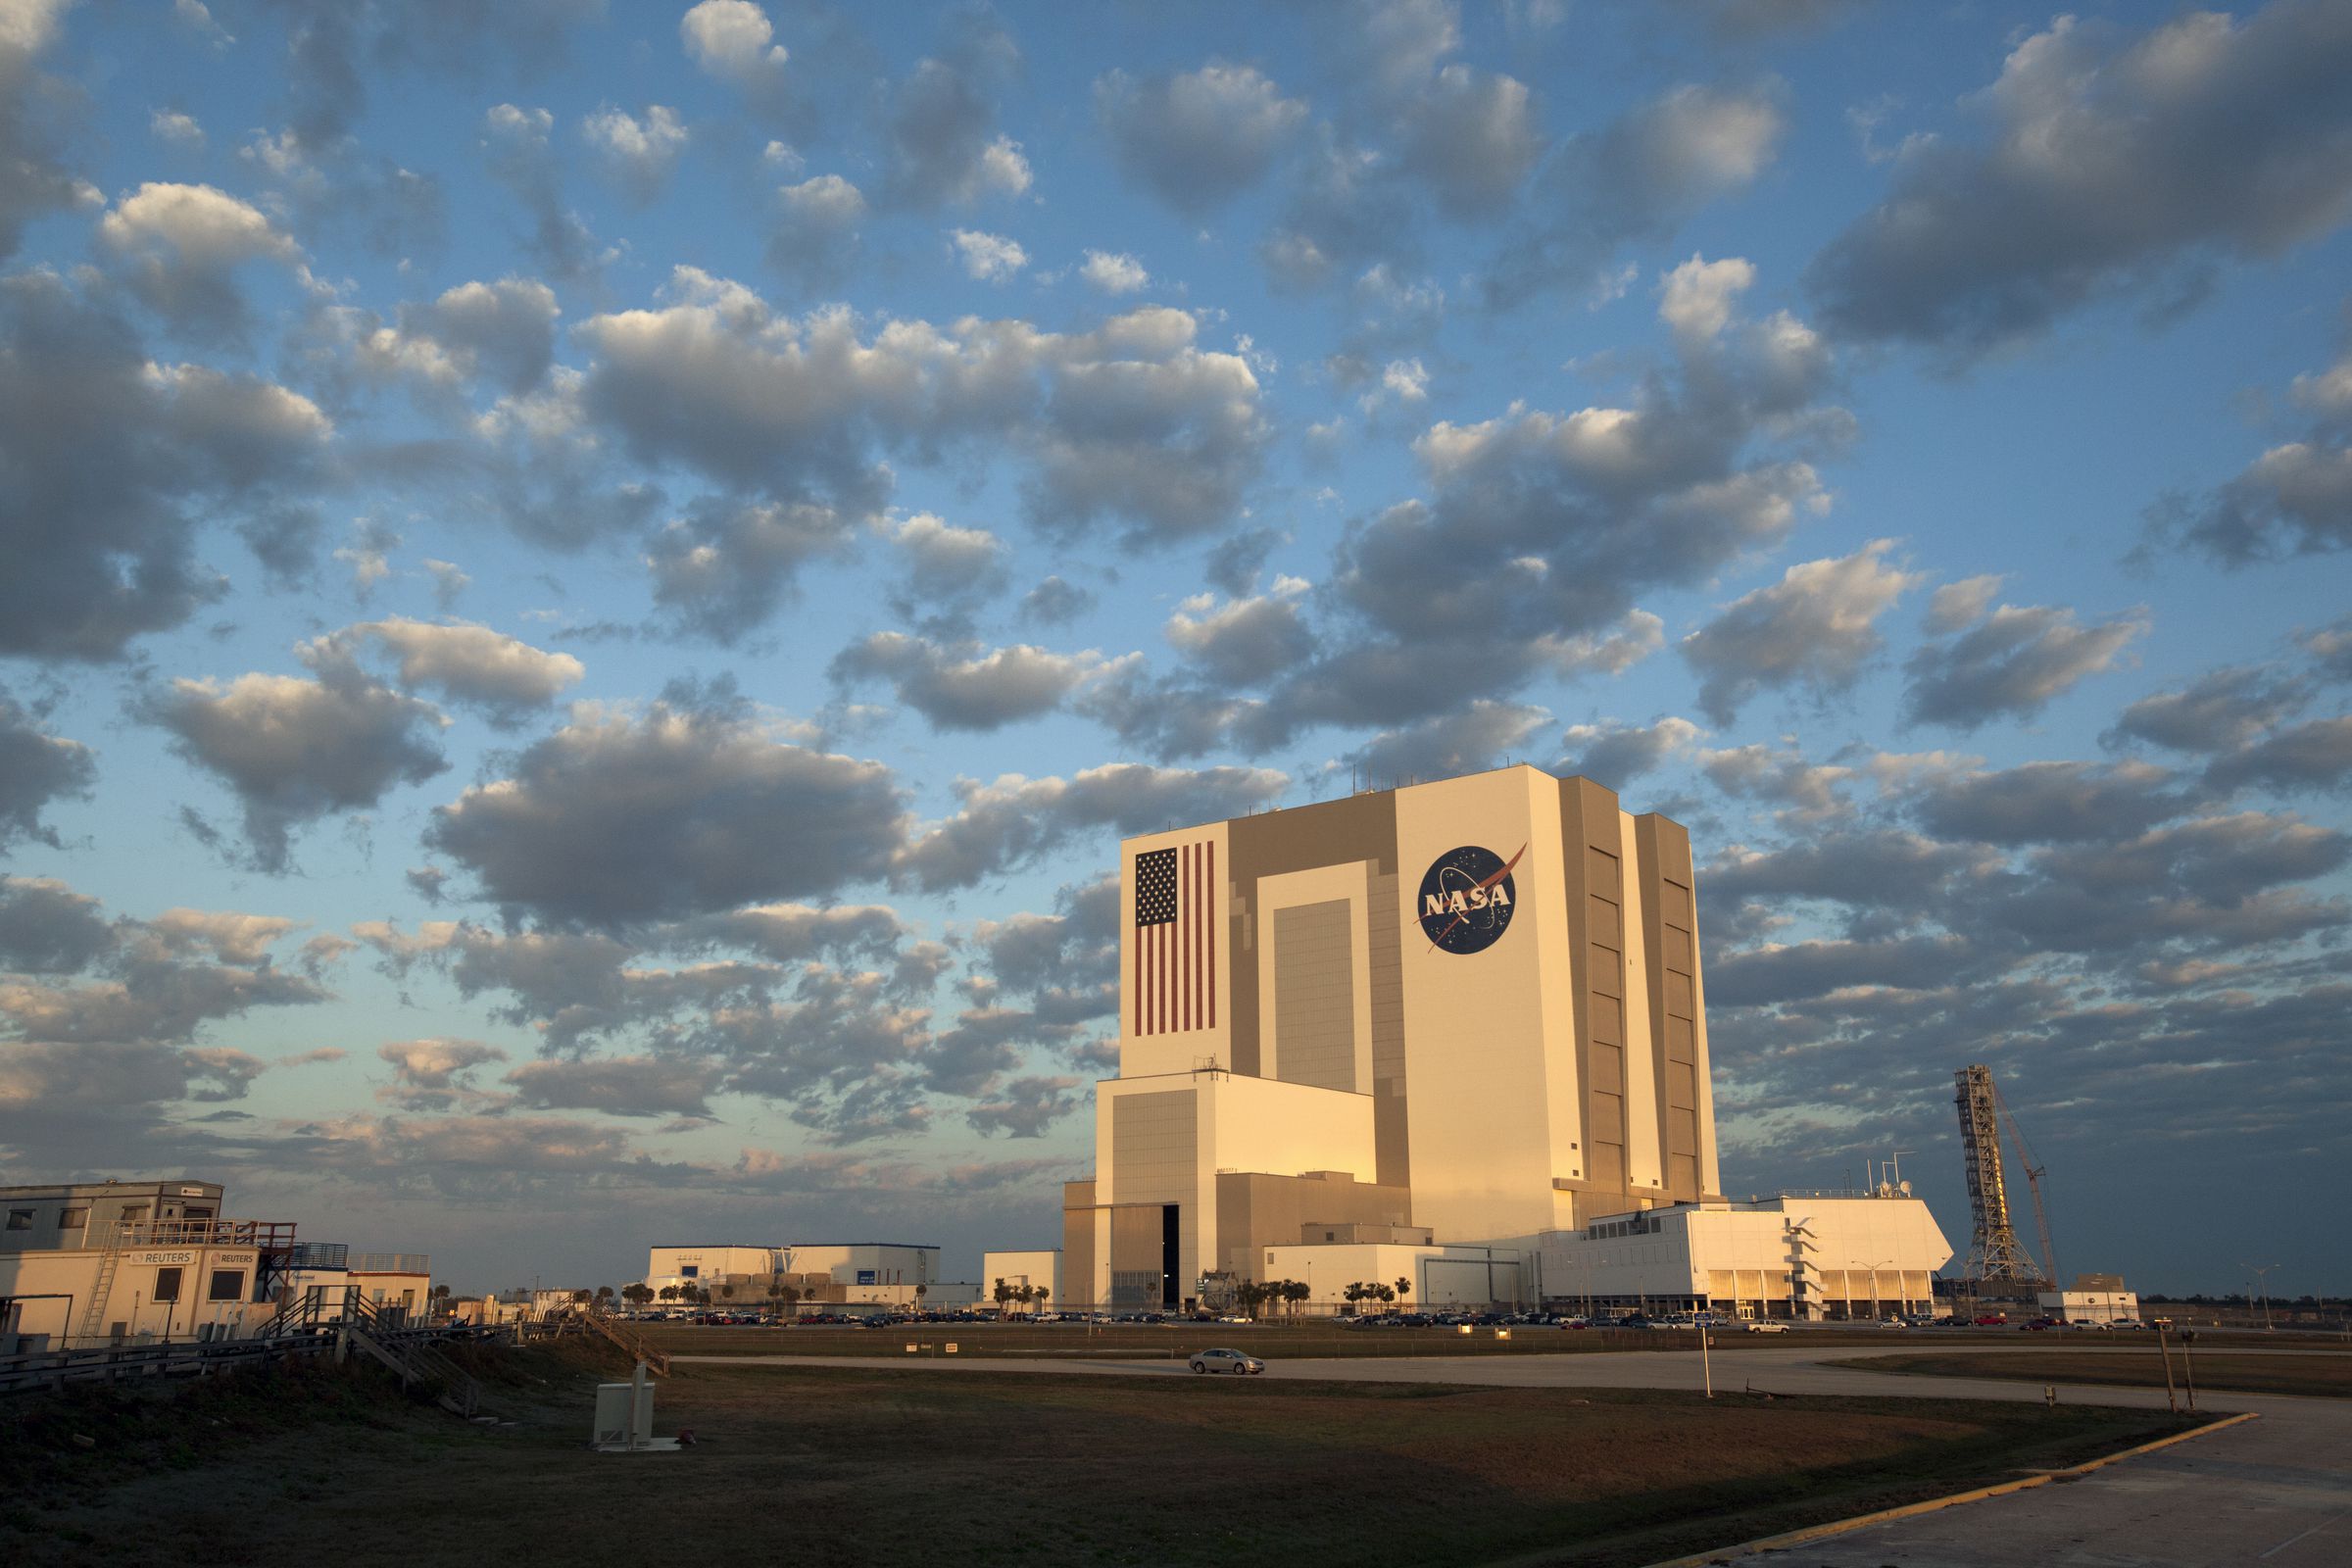 The Vertical Assembly Building at KSC